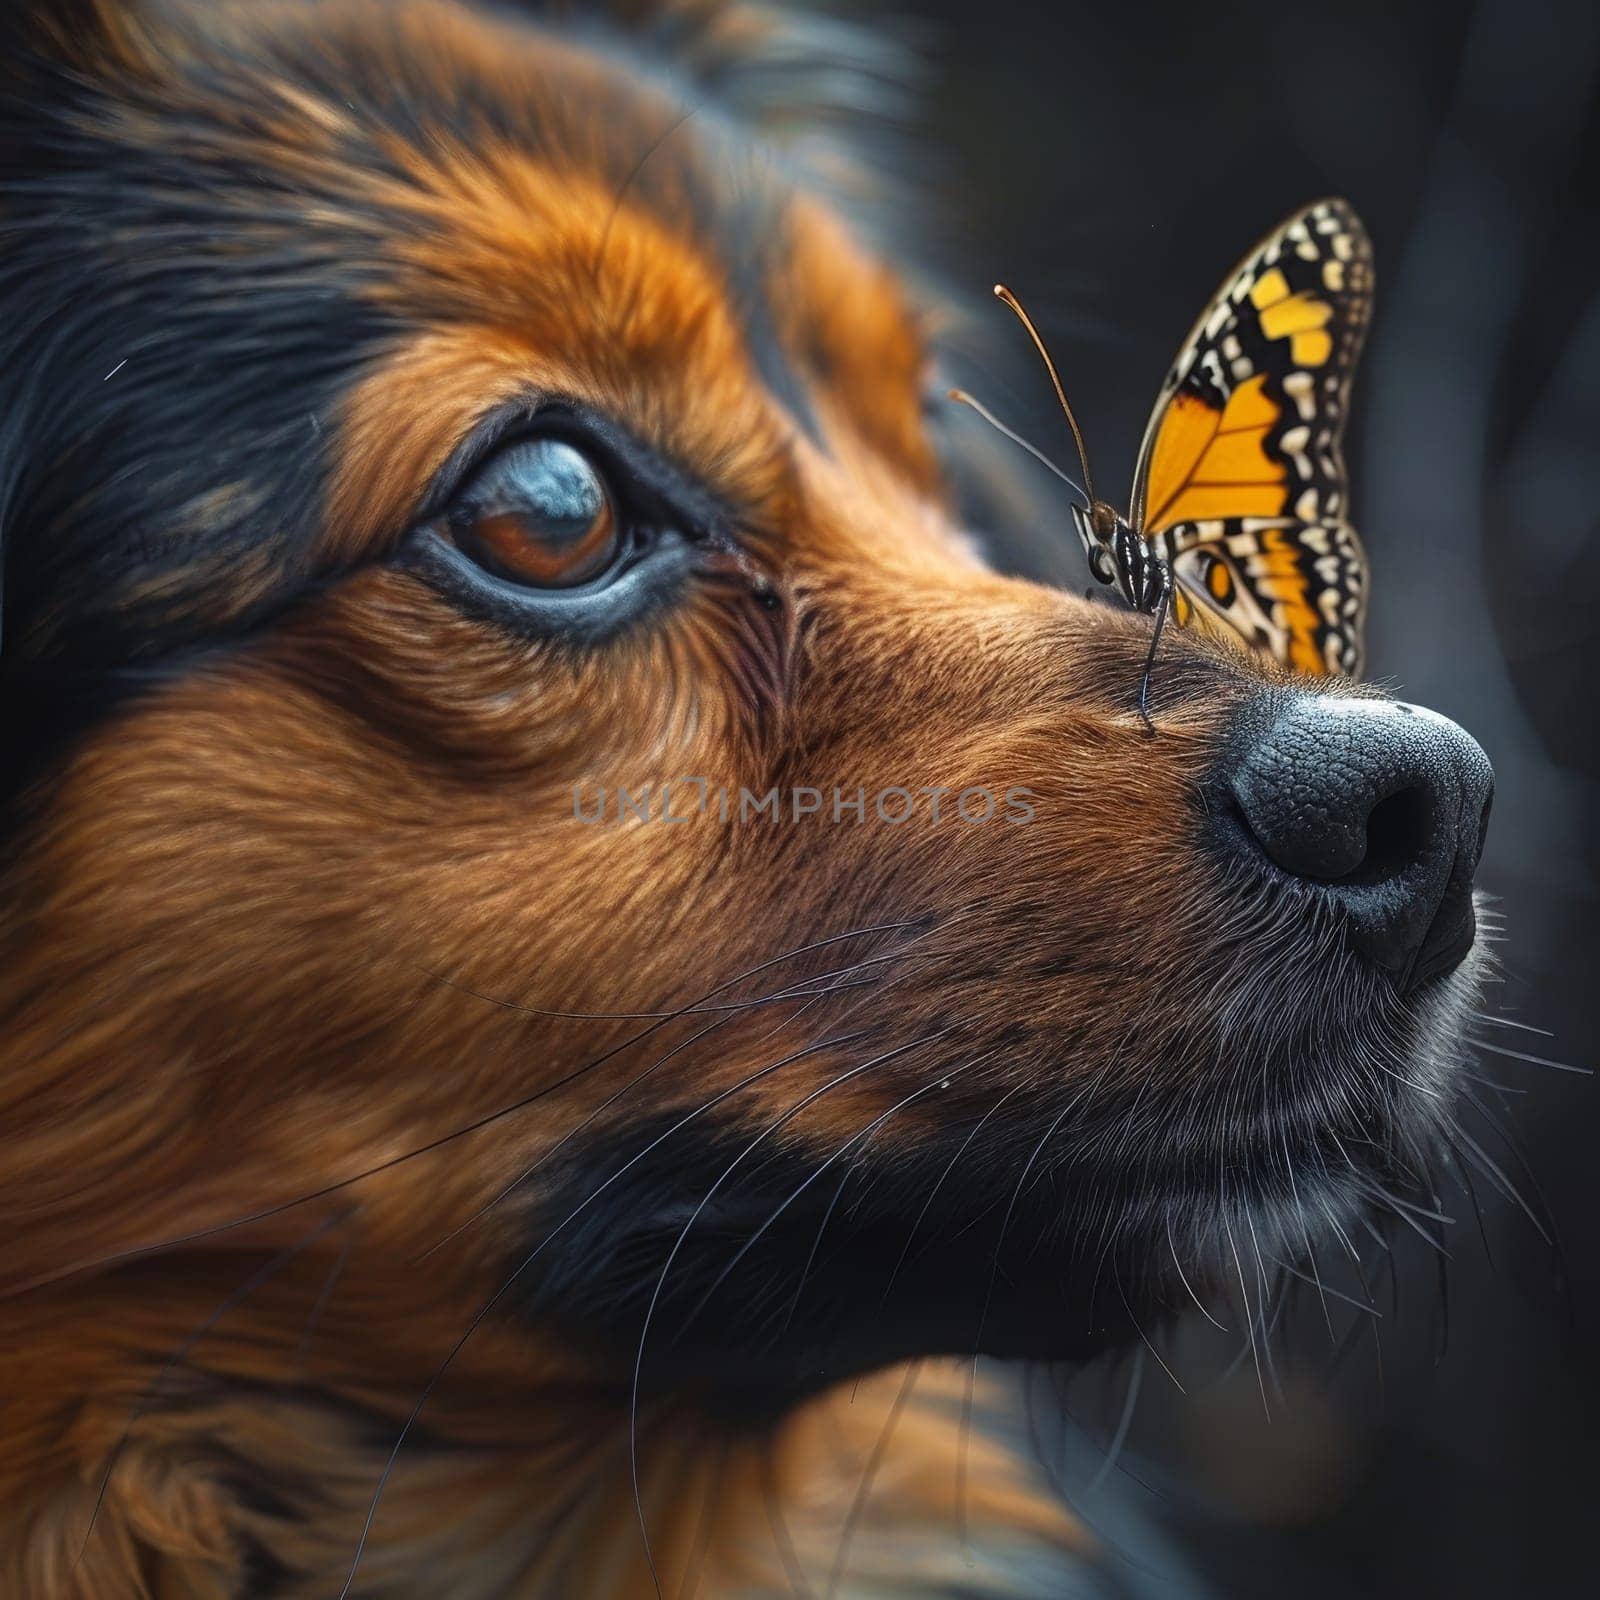 A close-up of a dog's face as a butterfly rests on its nose, capturing a moment of tranquil coexistence. The animal's gaze is diverted, allowing the delicate insect to perch peacefully.